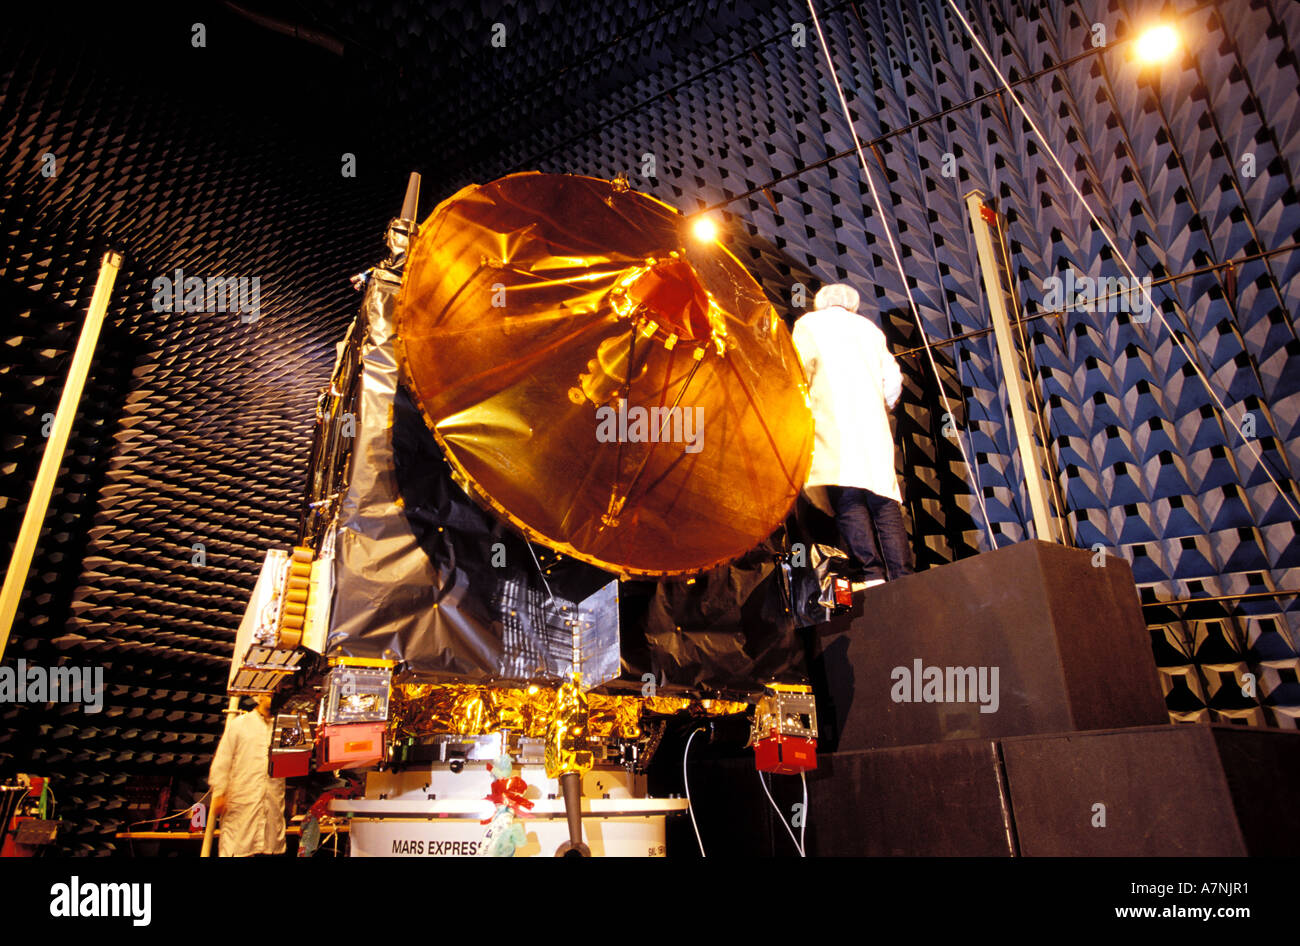 France, Haute Garonne, Toulouse, Mars Express satellite in the anechoic chamber at Interspace Stock Photo